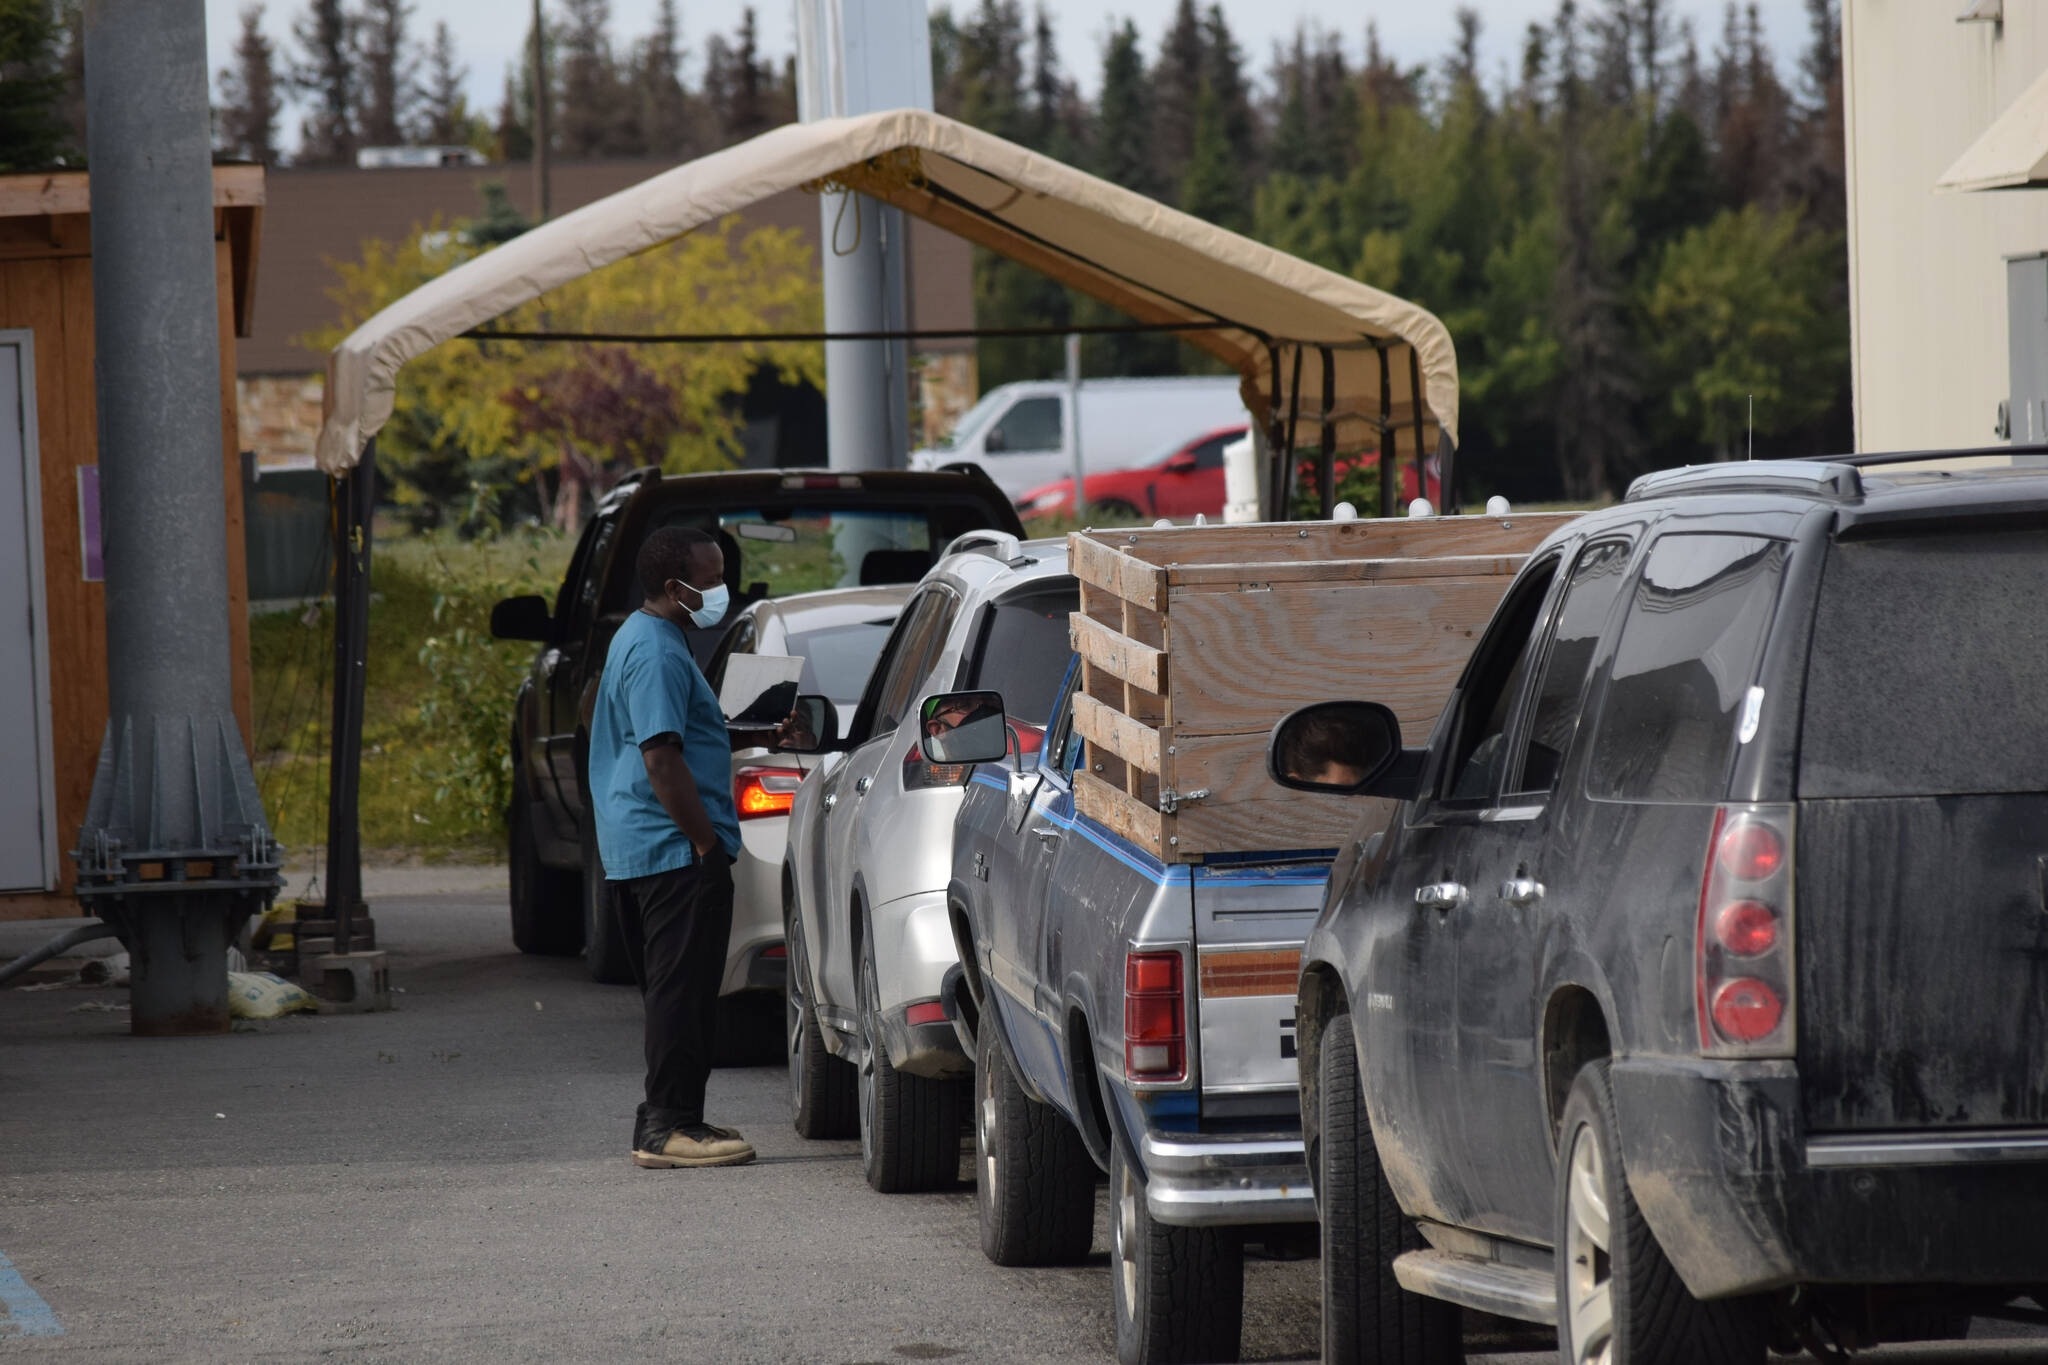 A health care professional prepares to administer a COVID-19 test outside Capstone Clinic in Kenai, Alaska, on Tuesday, Sept. 7, 2021. Capstone announced Wednesday it will end public COVID-19 testing at the end of the month. (Camille Botello/Peninsula Clarion)